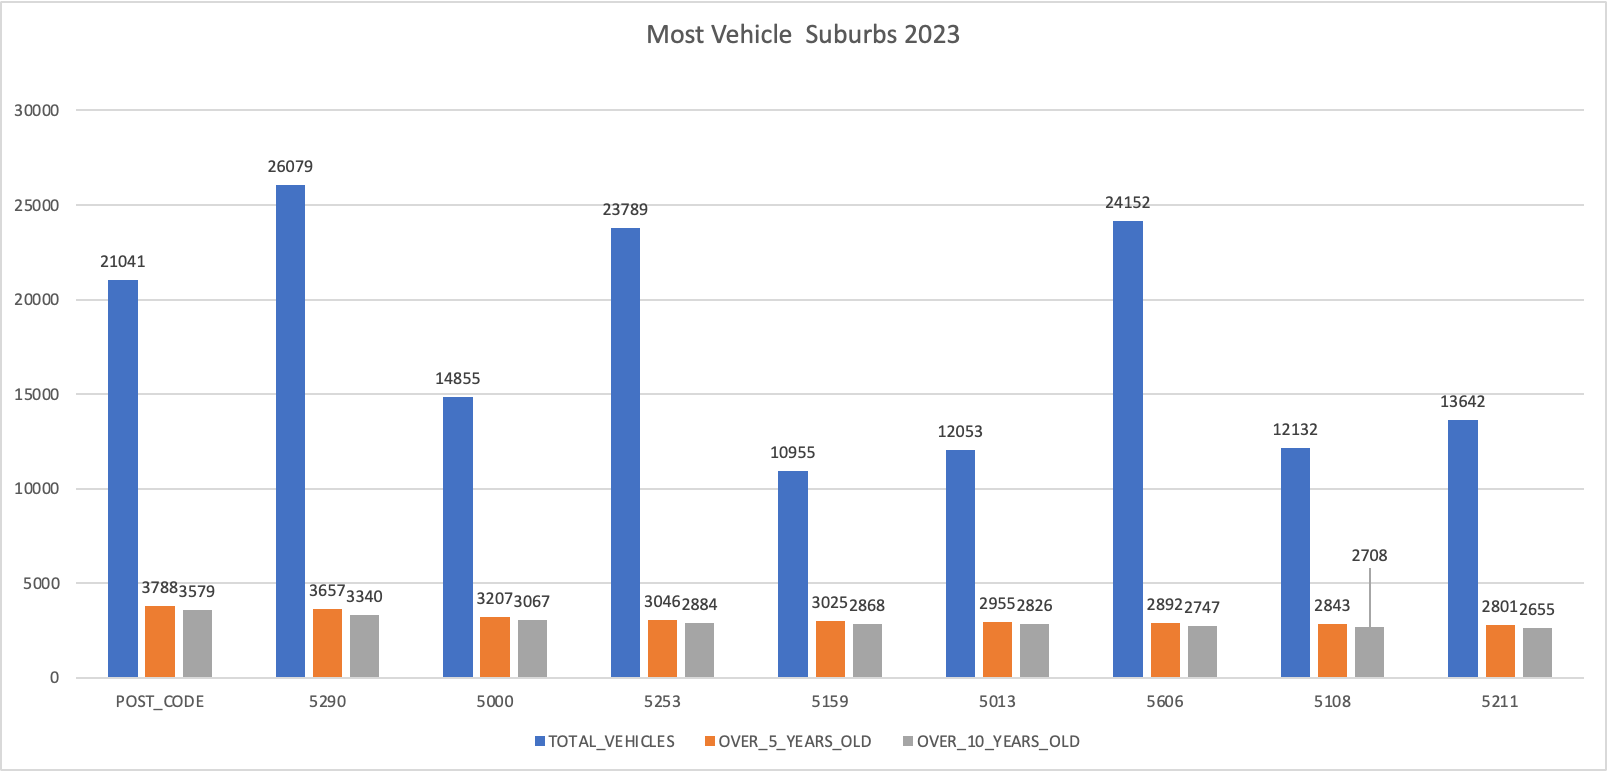 Vehicles Numbers at Locations 2023